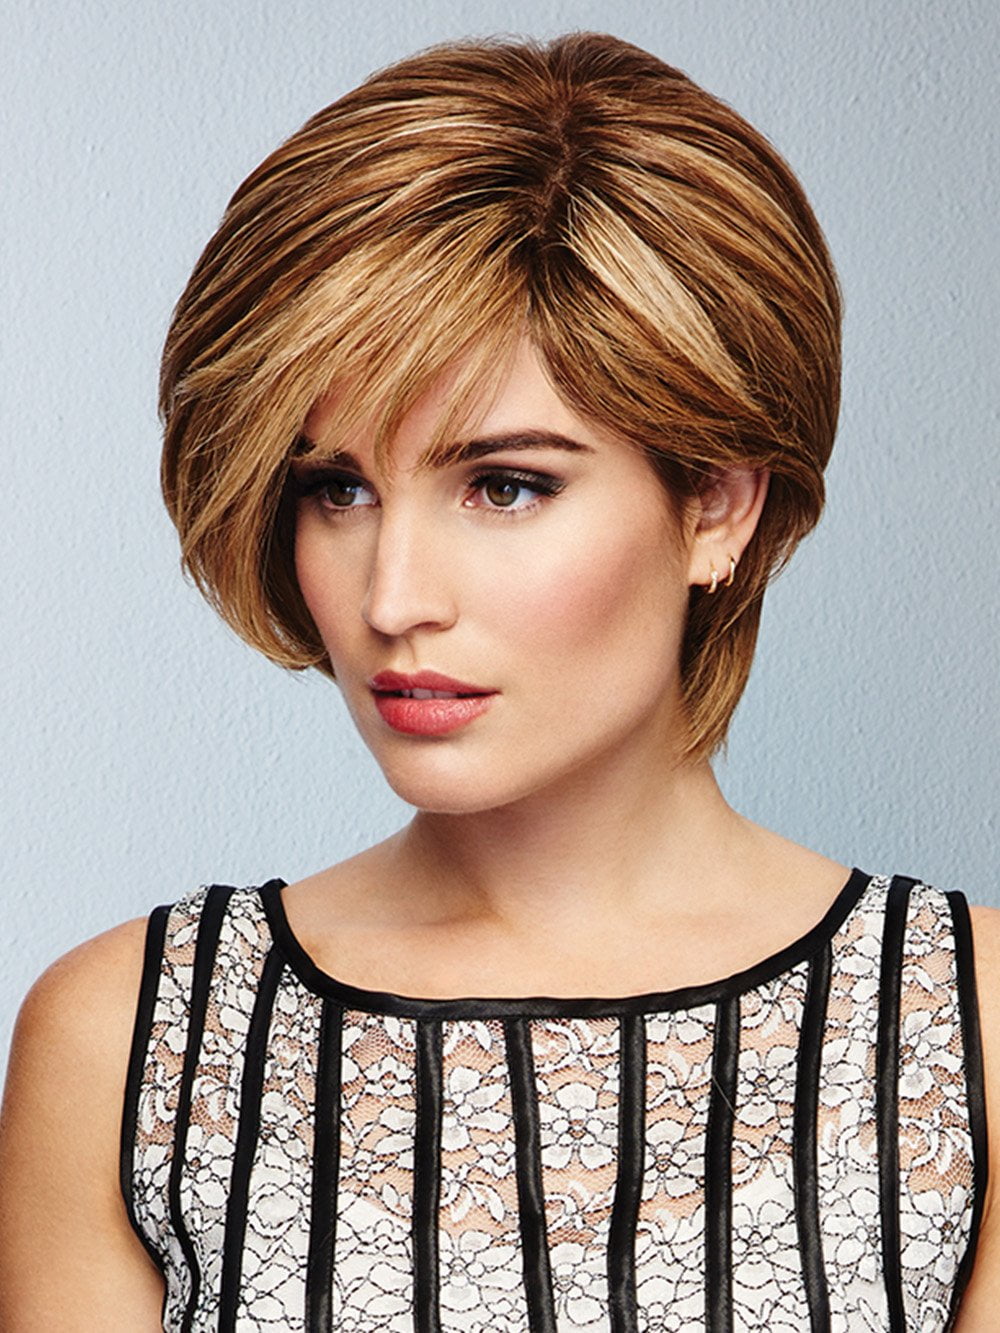 CALLING ALL COMPLIMENTS Wig by RAQUEL WELCH in SS12/22 SHADED CAPPUCCINO | Light Golden Brown Evenly Blended with Cool Platinum Blonde Highlights and Dark Roots